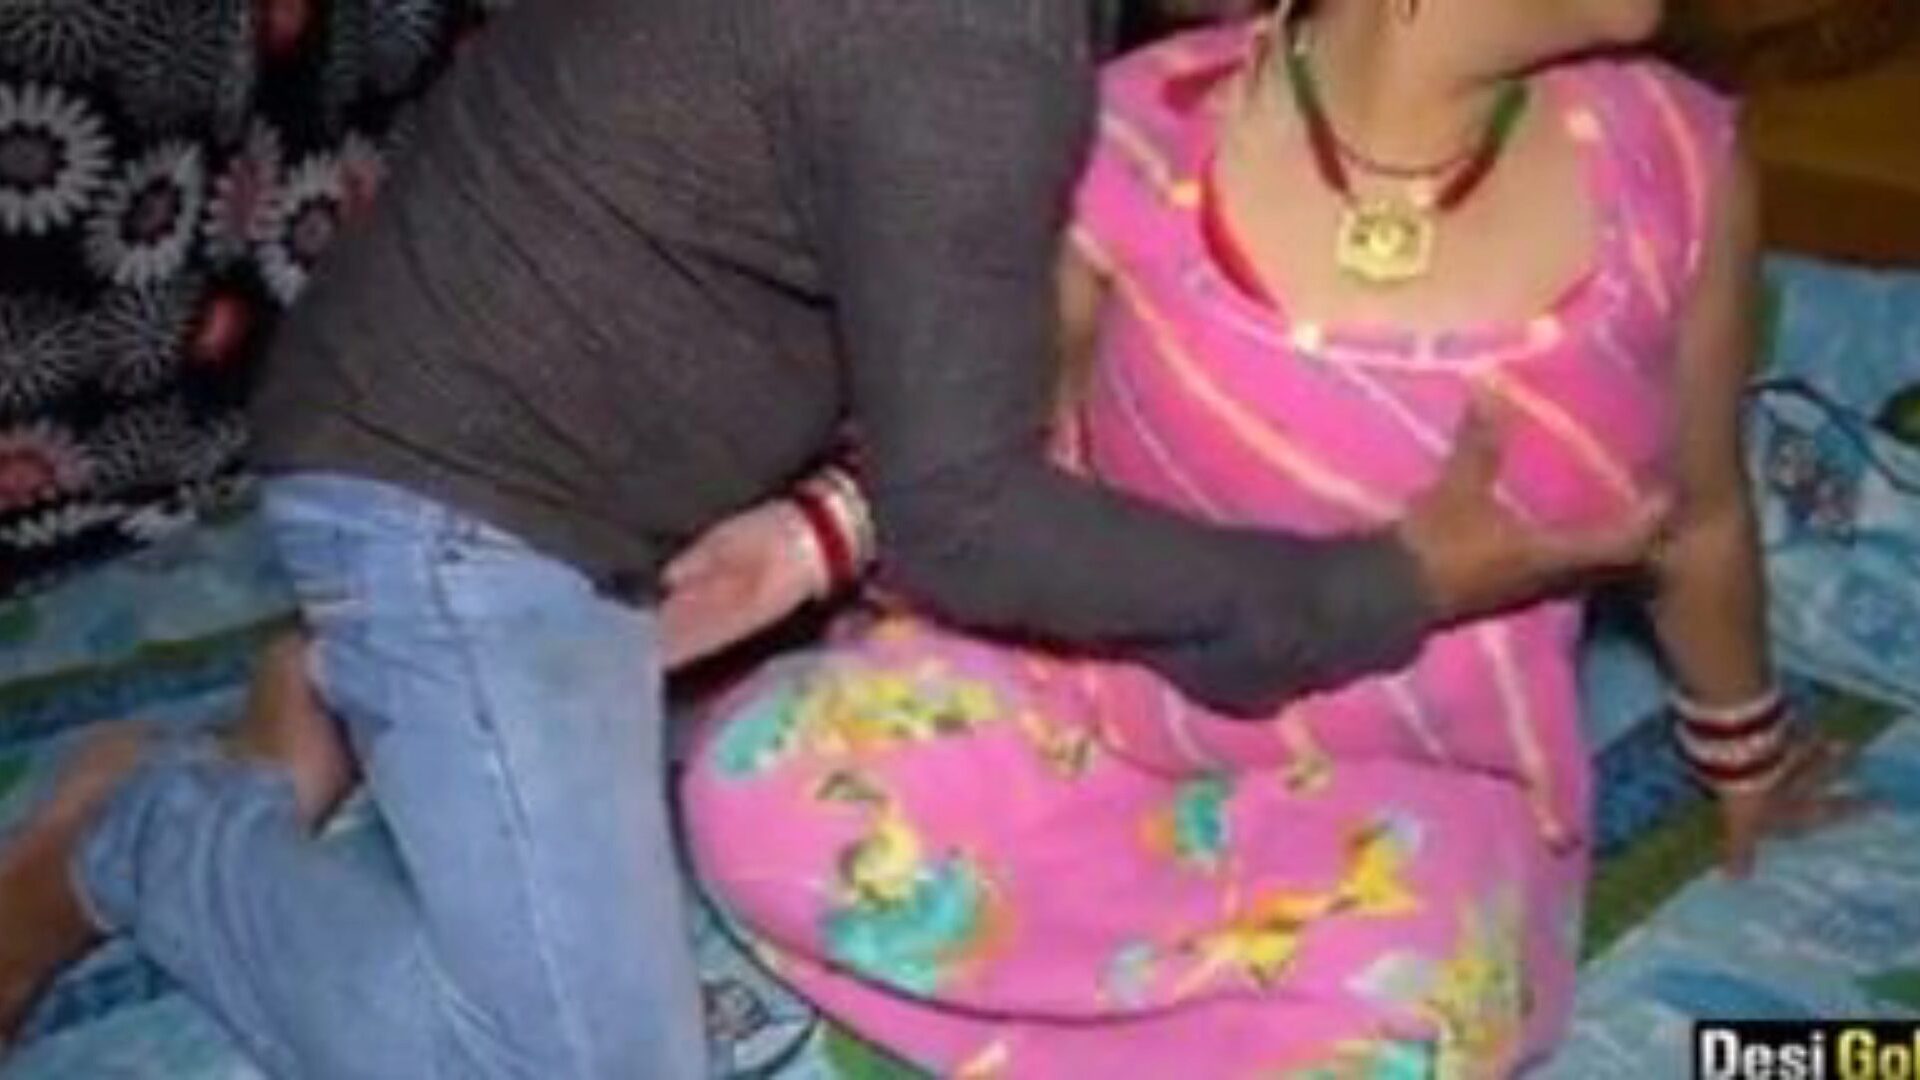 Home alone aunty, loud groaning and spraying Hindi audio Indian prefect body ravage